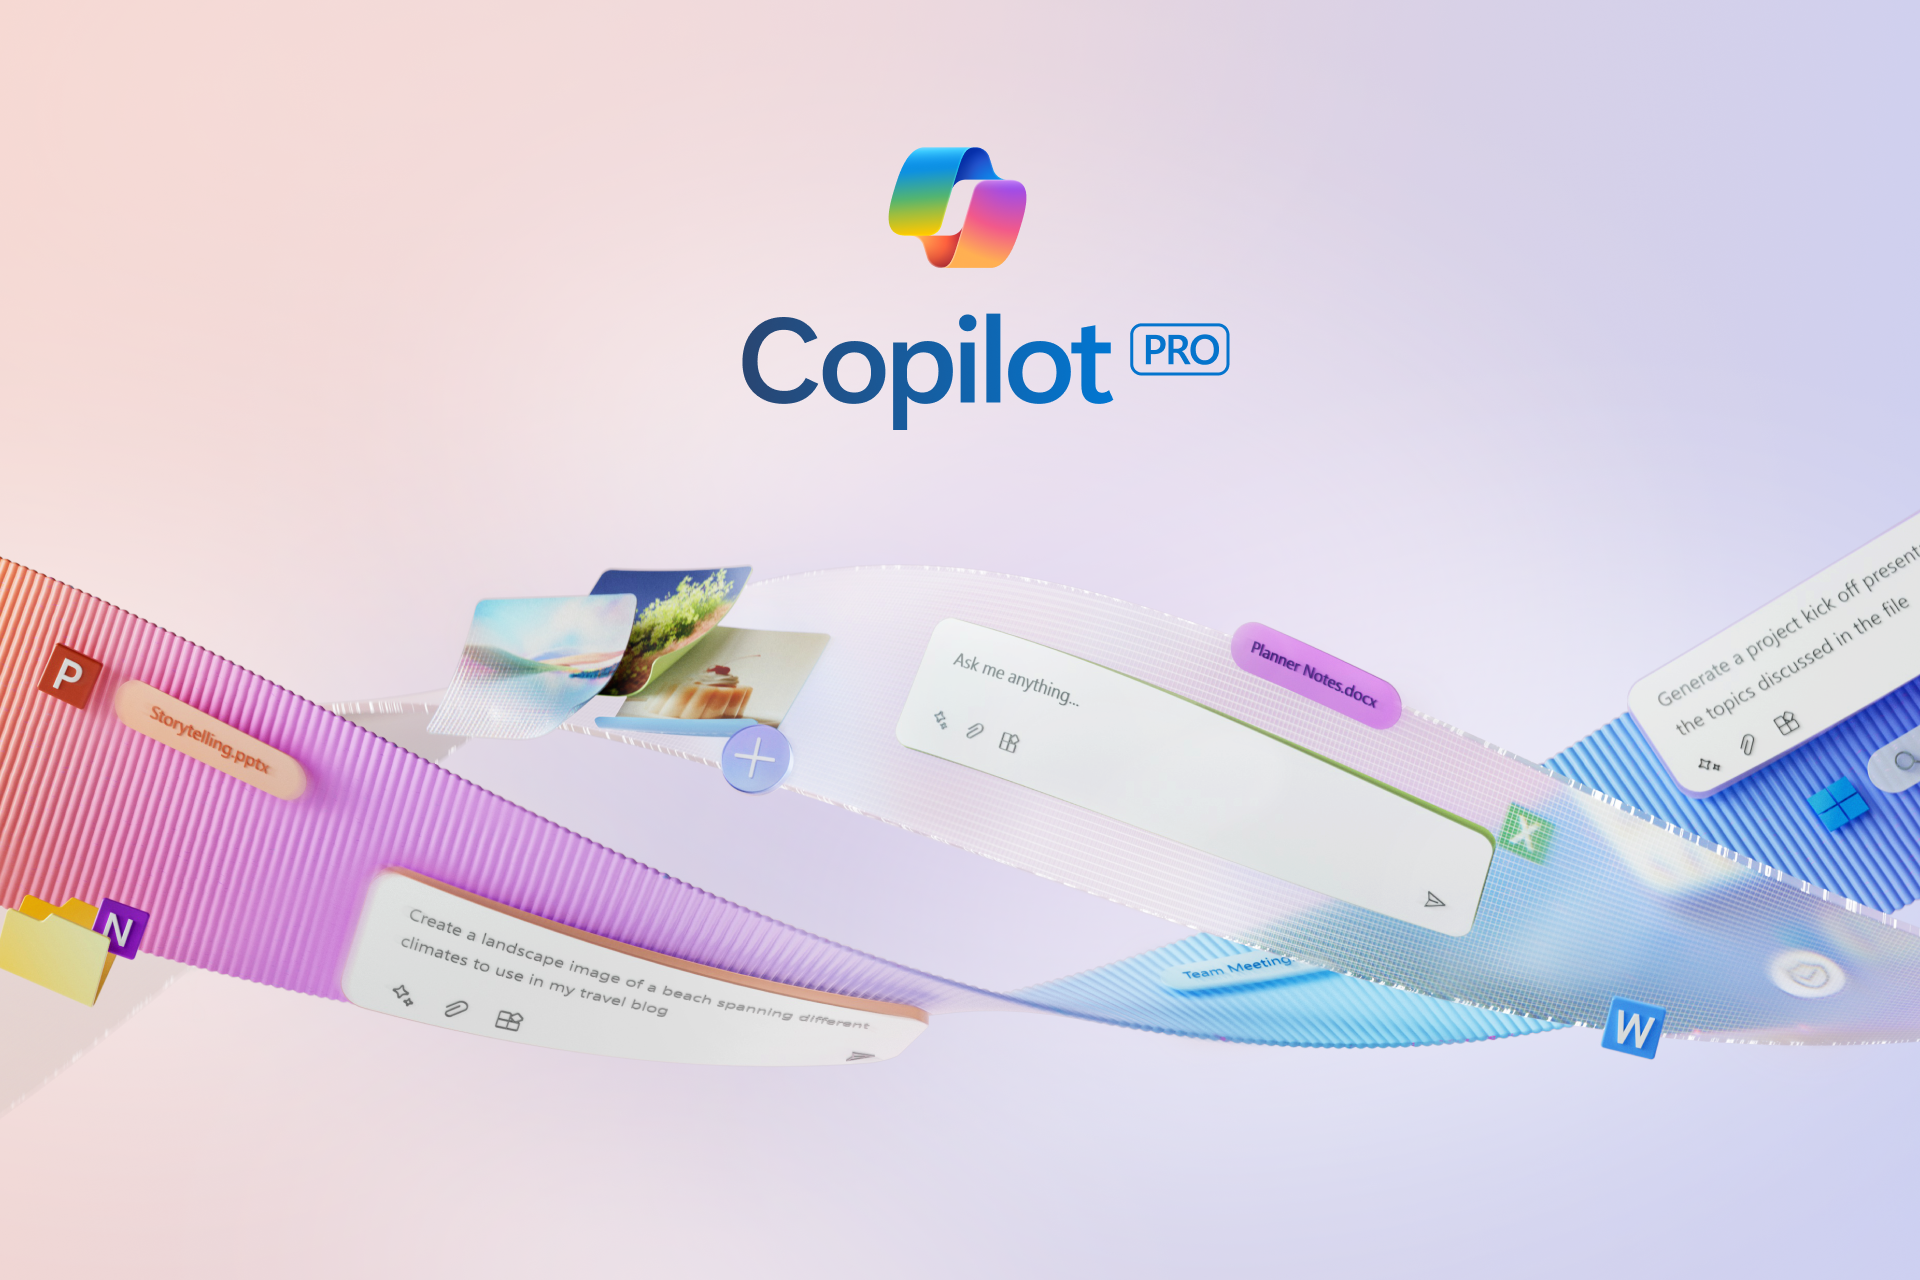 It’s becoming harder to resist the benefits of Copilot Pro